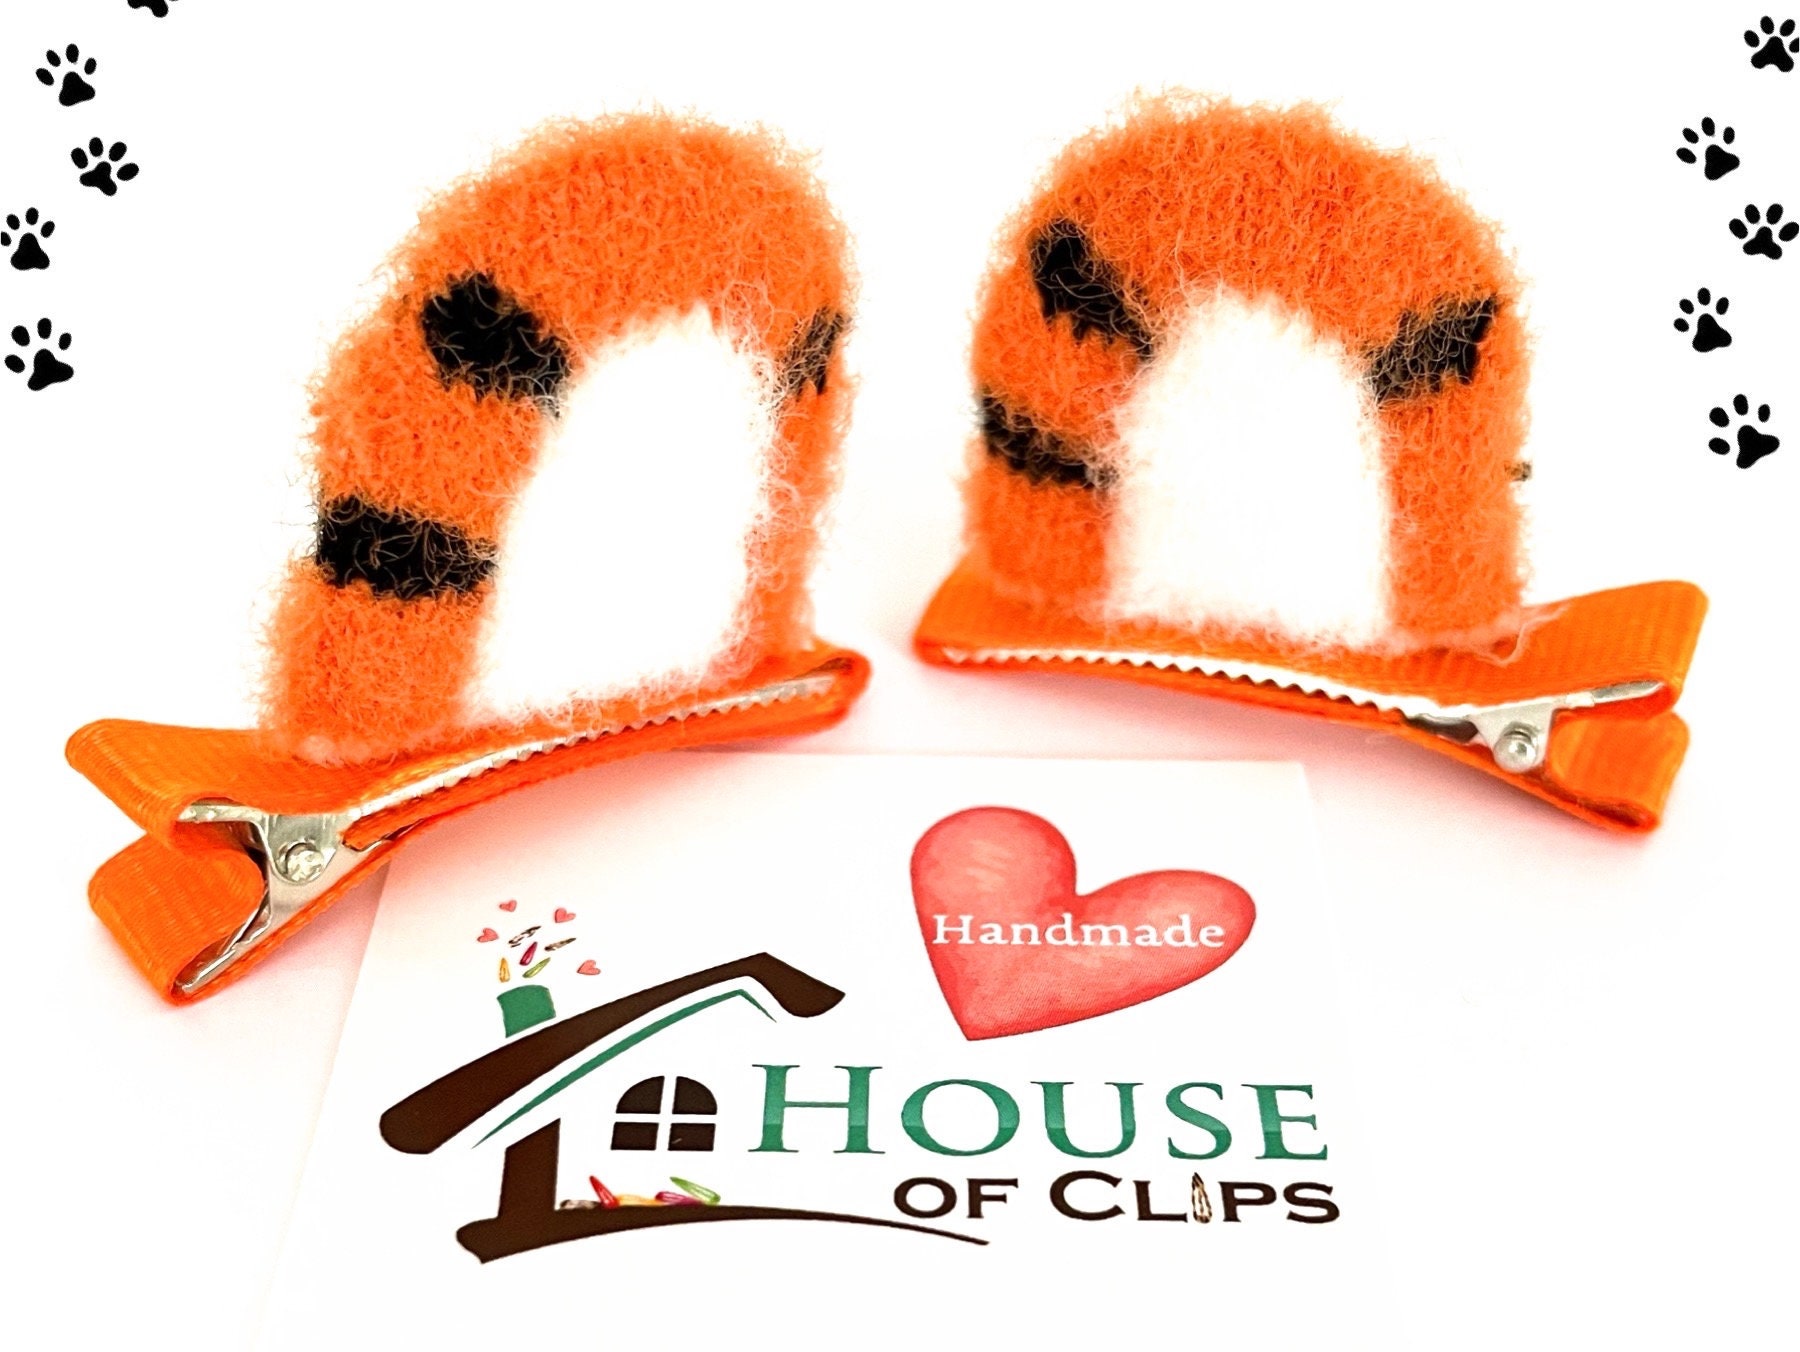 House Of Clips